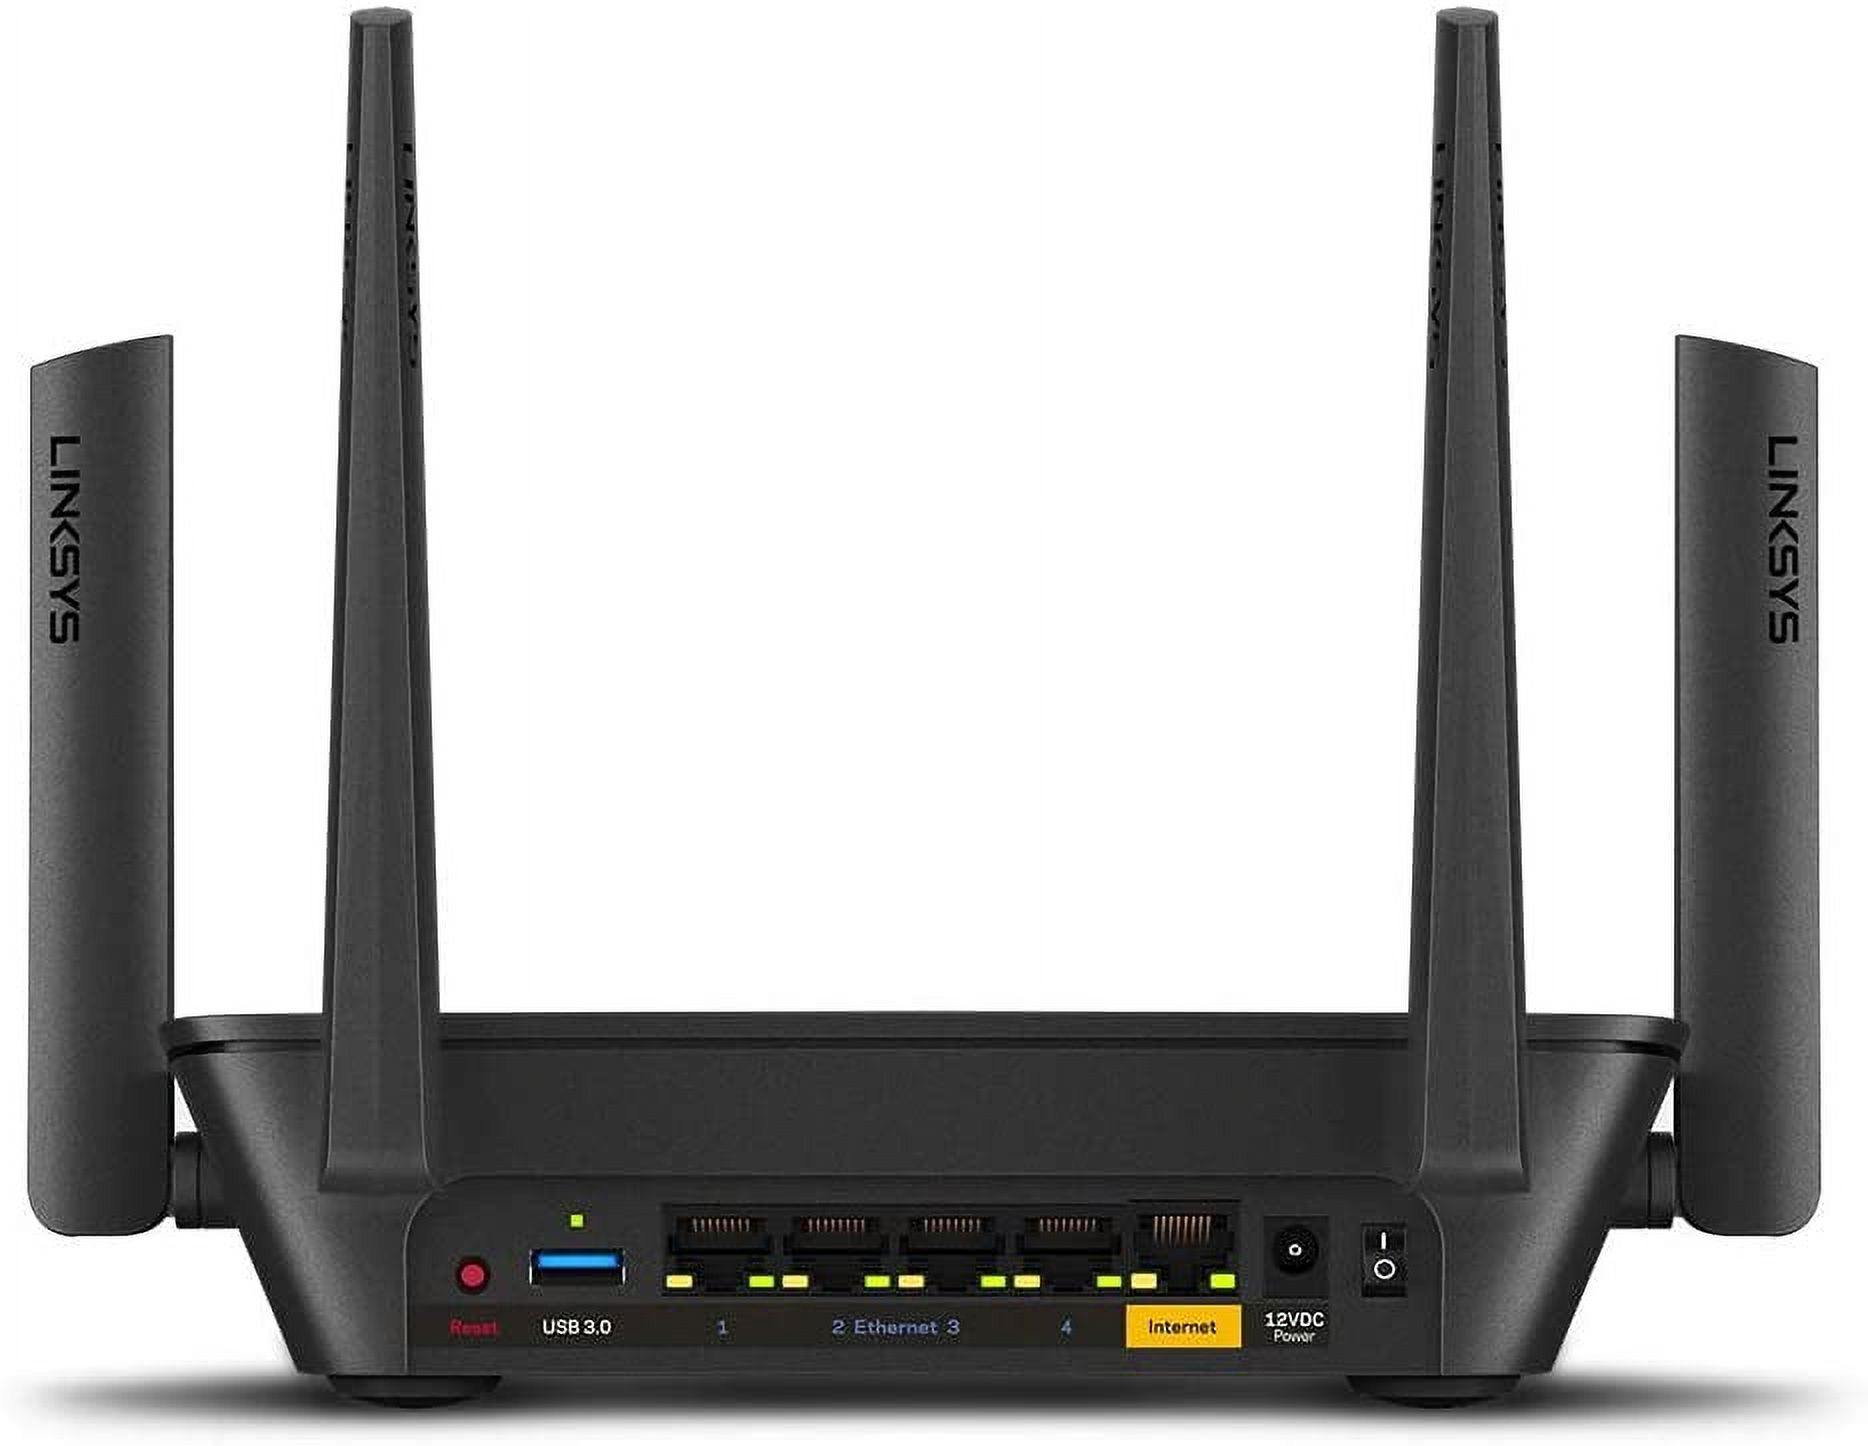 Restored Linksys MR9000 Mesh Wi-Fi Router (Tri-Band Router, Wireless Mesh Router for Home AC3000), Future-Proof MU-Mimo Fast Wireless Router (Refurbished) - image 5 of 7